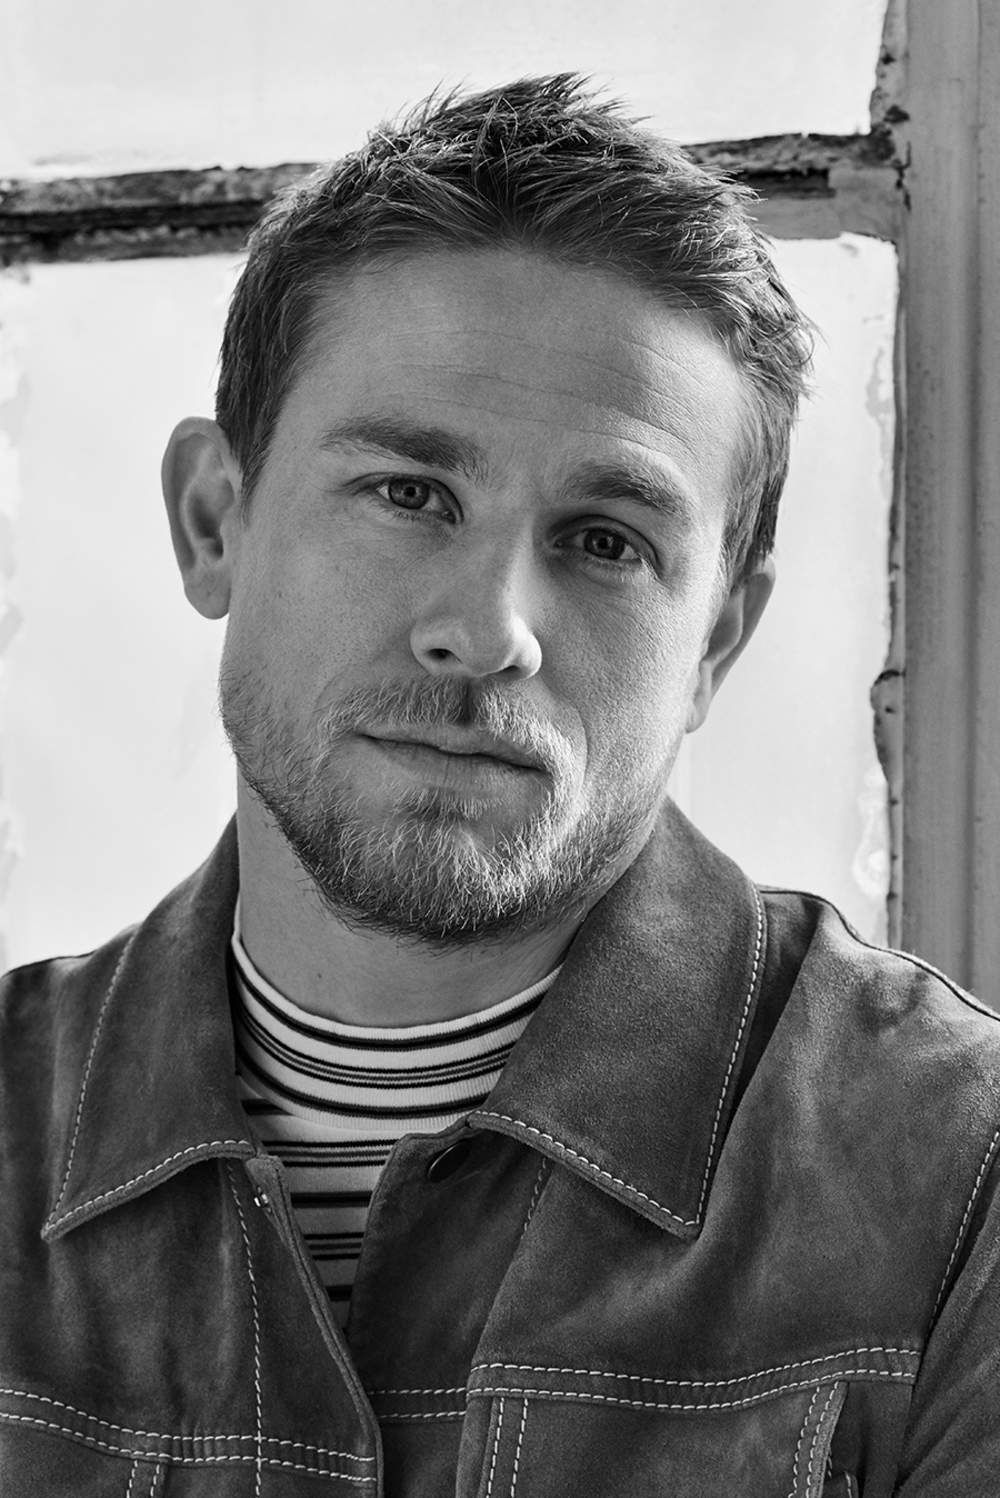 Mr Charlie Hunnam's Life After Motorbikes | The Look | The Journal | Issue 314 | 05 April 2017 - Mr Charlie Hunnam's Life After Motorbikes | The Look | The Journal | Issue 314 | 05 April 2017 -   18 beauty Boys charlie hunnam ideas